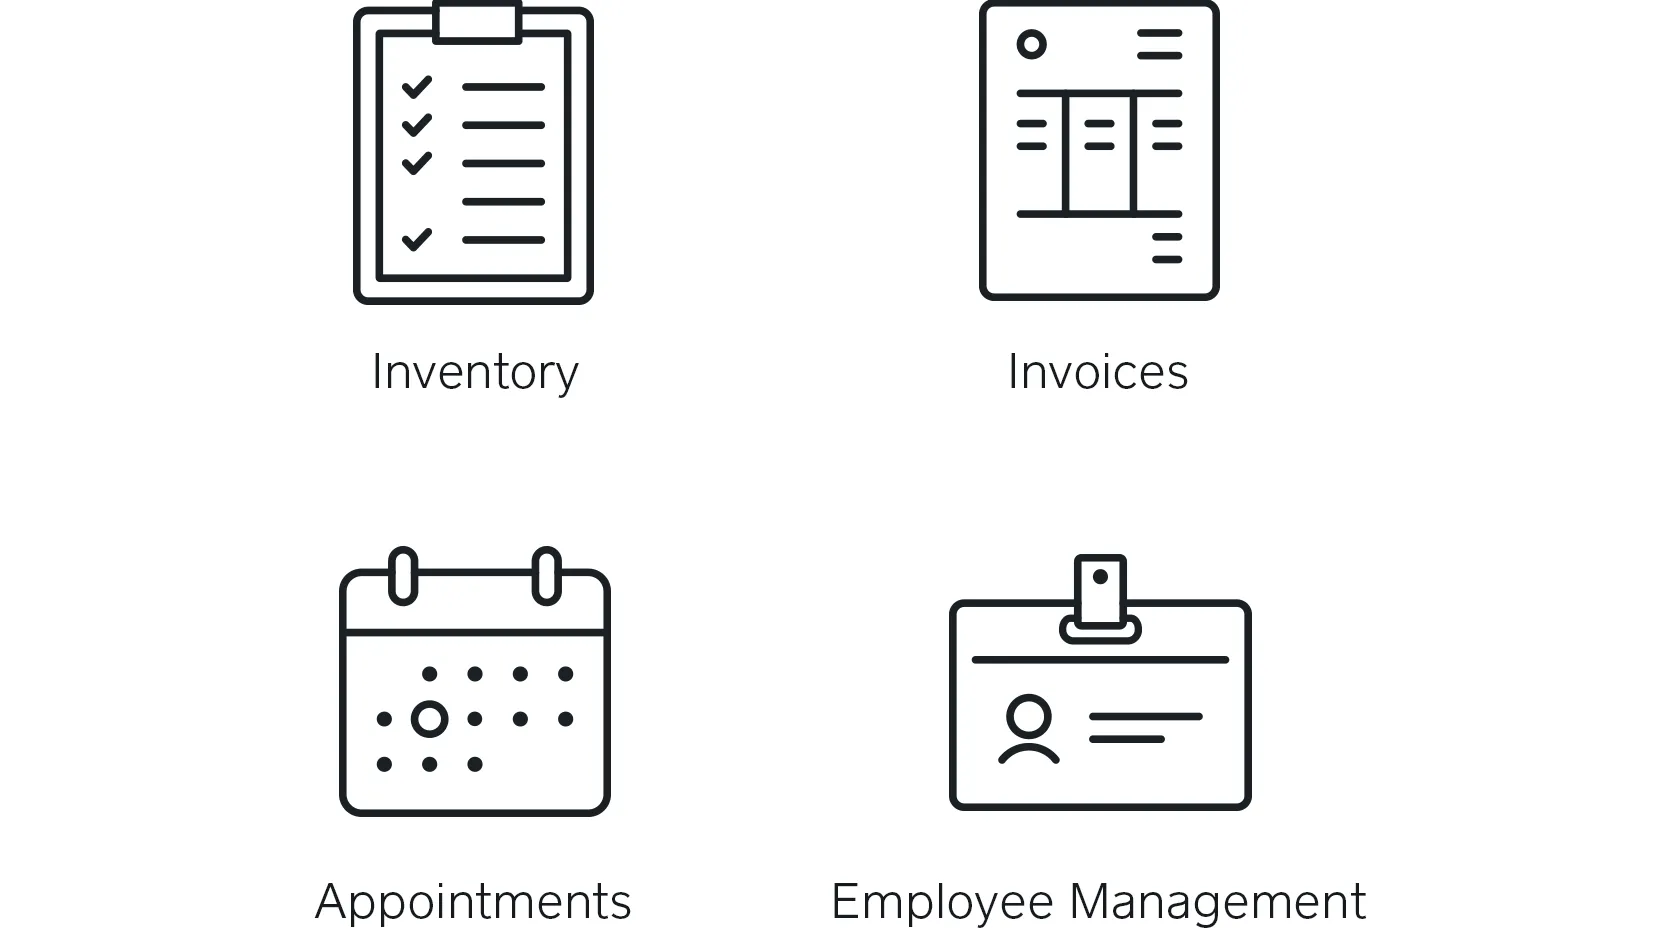 Icons for Square Inventory, Invoices, Appointments, and Team Management